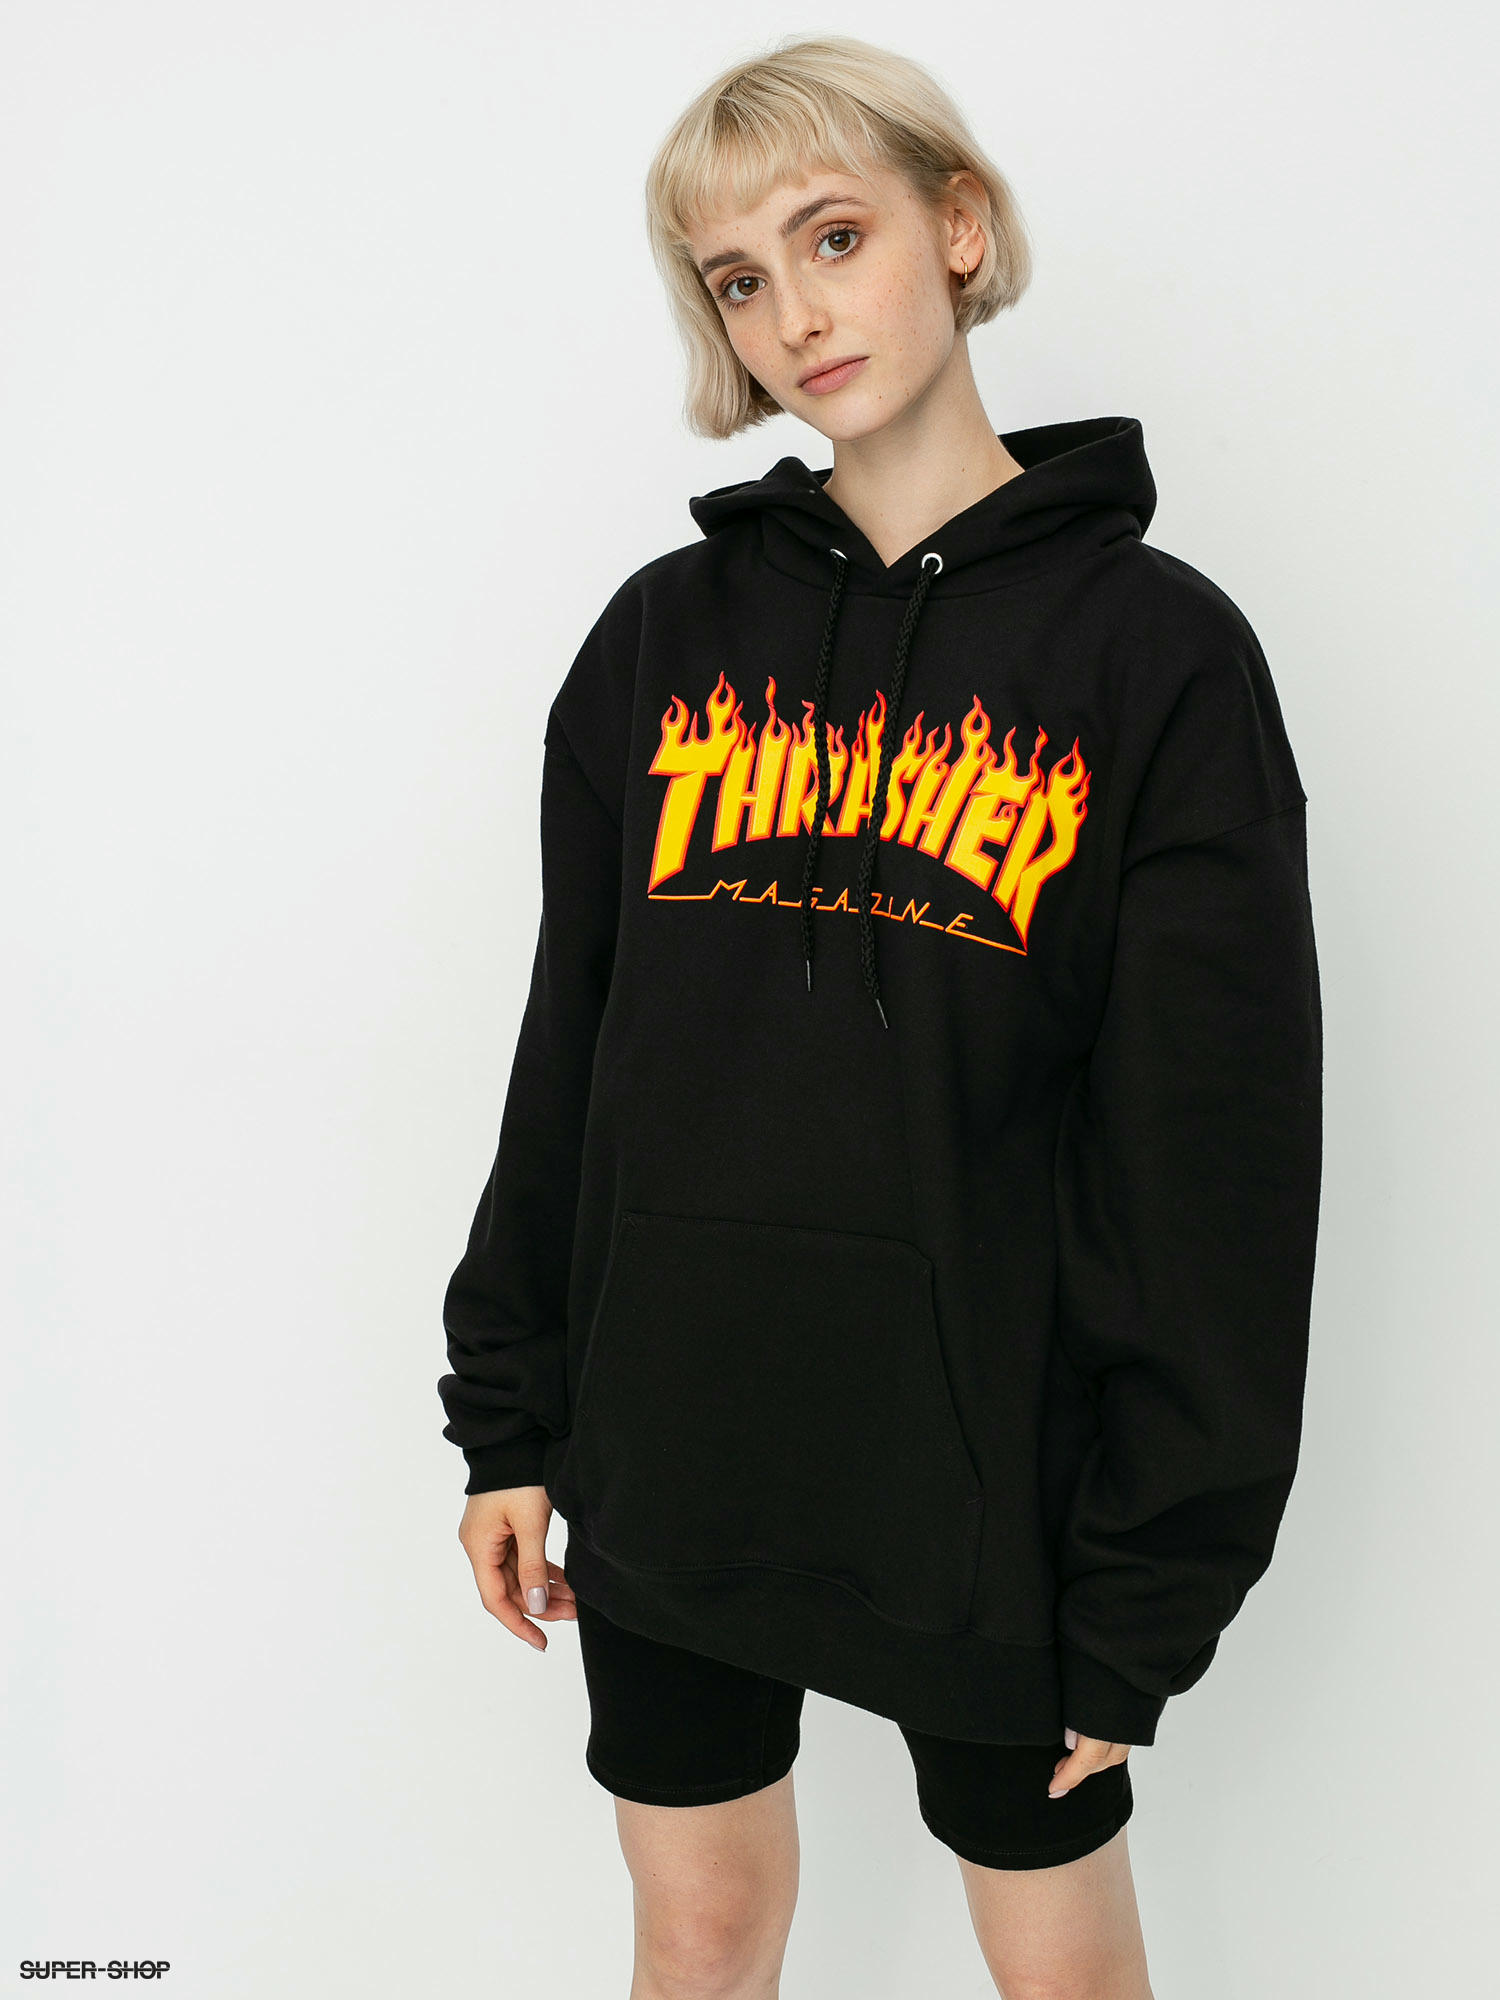 thrasher hoodie with flames on sleeves